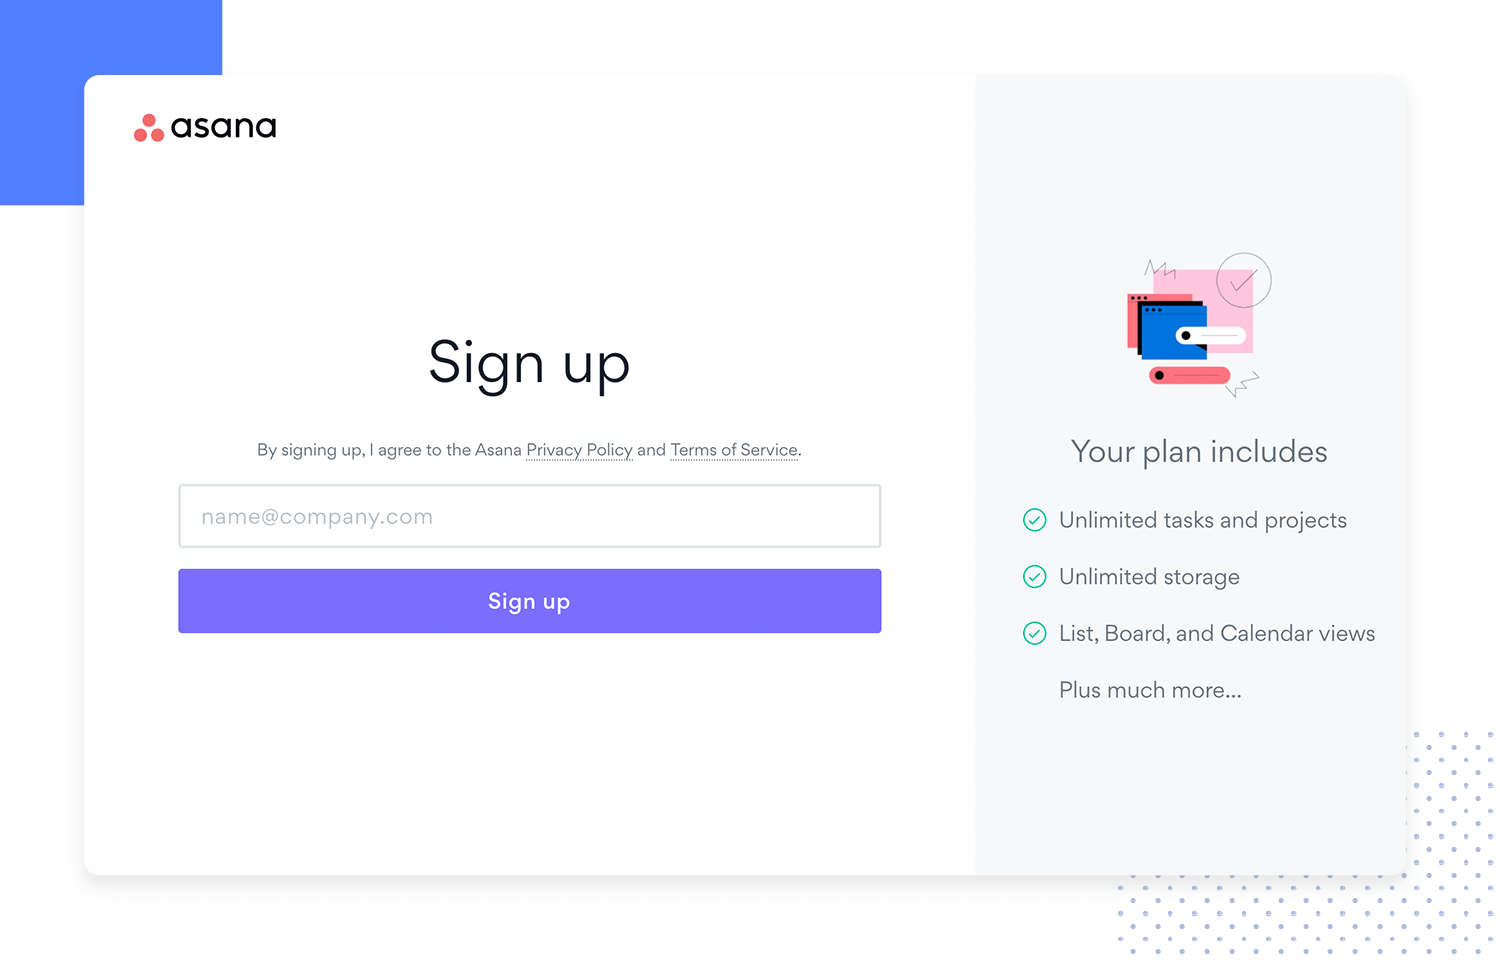 asana's example of signup form